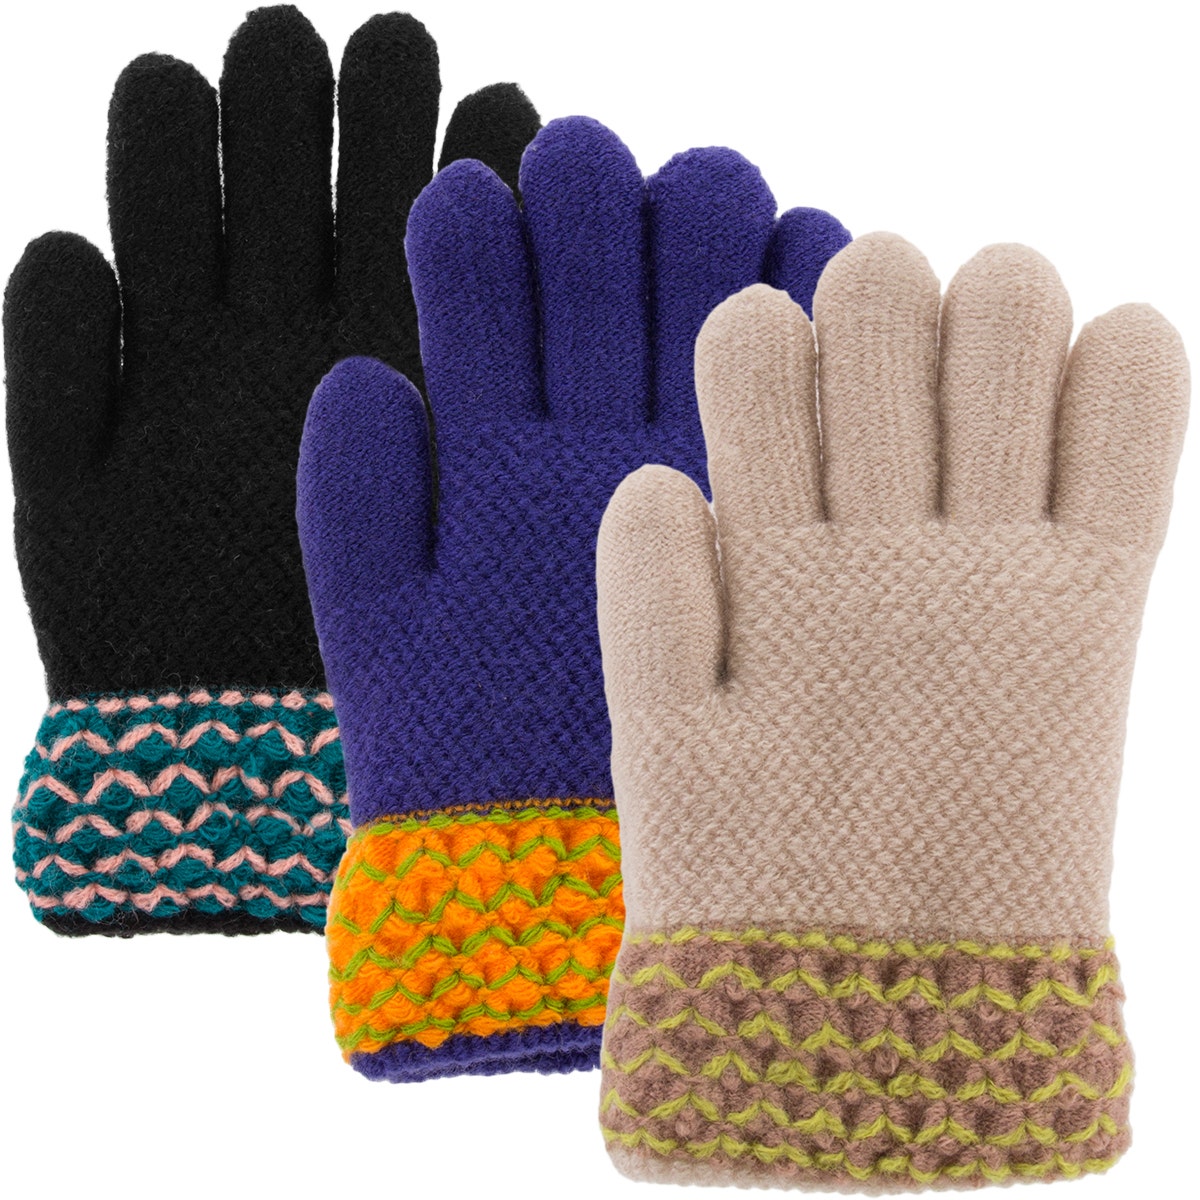 3 Pairs Little Girls Knit Gloves With Soft Sherpa Fleece Lining